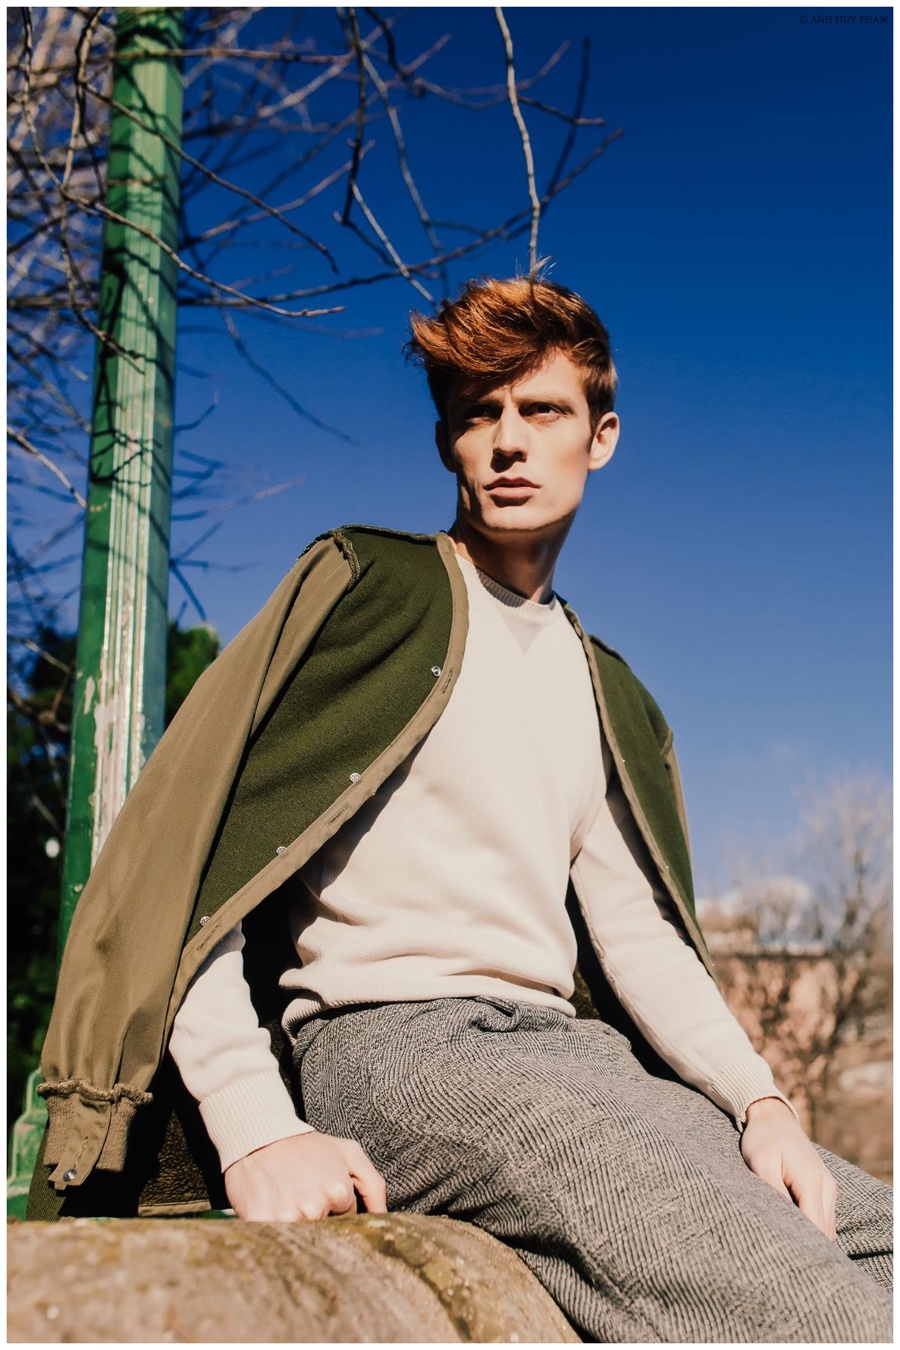 Robin van Der Krogt Heads Outdoors for a Paris Shoot by Anh Huy Pham ...